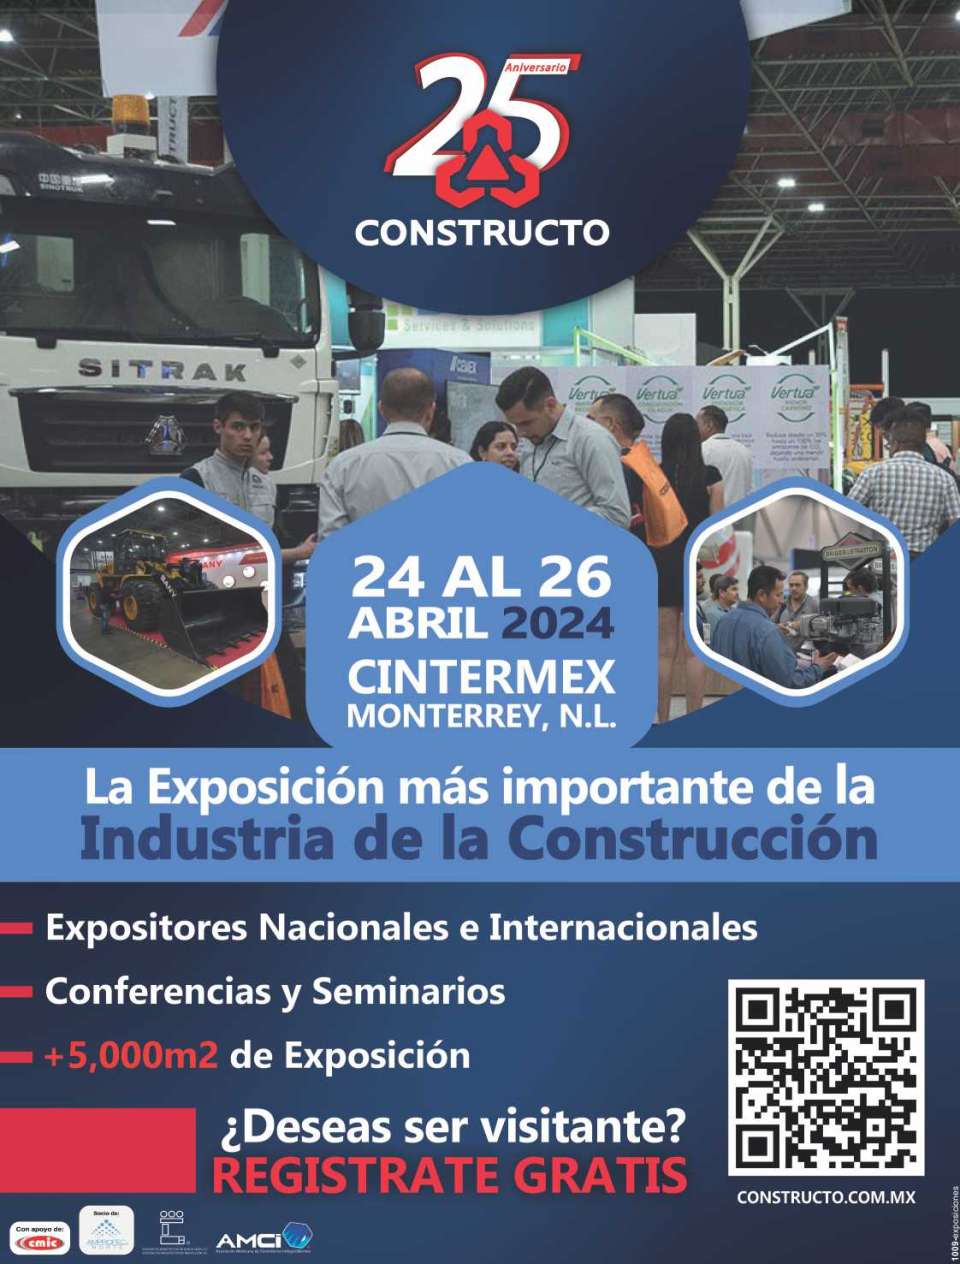 CONSTRUCTO International Exhibition of the Construction Industry. Cintermex Monterrey, 24 to 26 of April 2024.